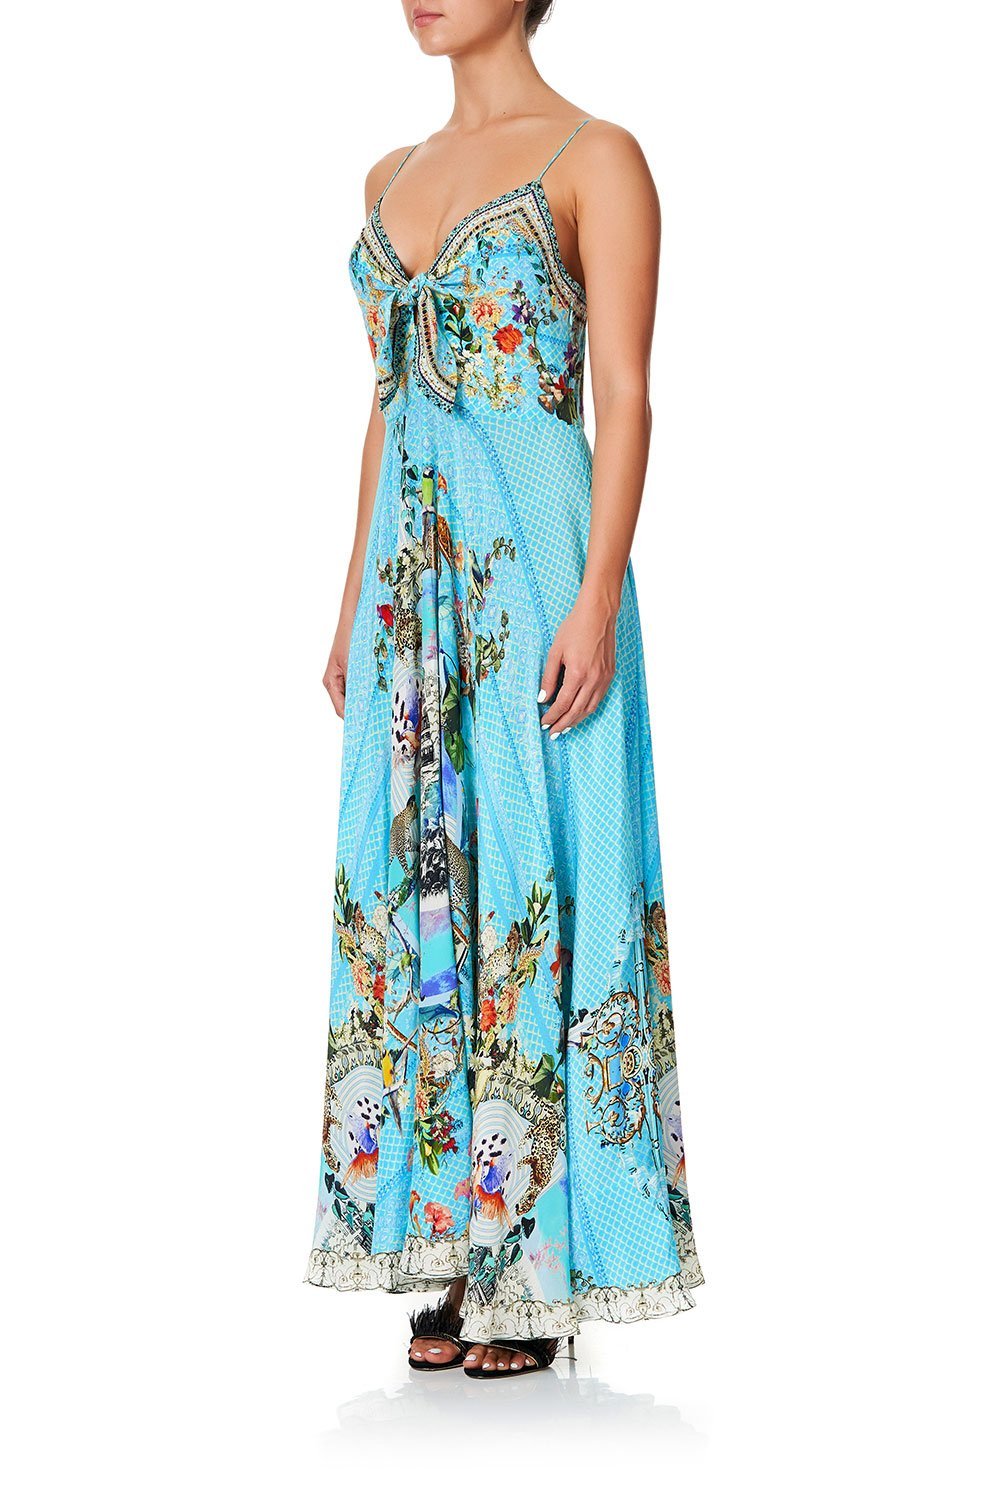 LONG DRESS WITH TIE FRONT GIRL FROM ST TROPEZ